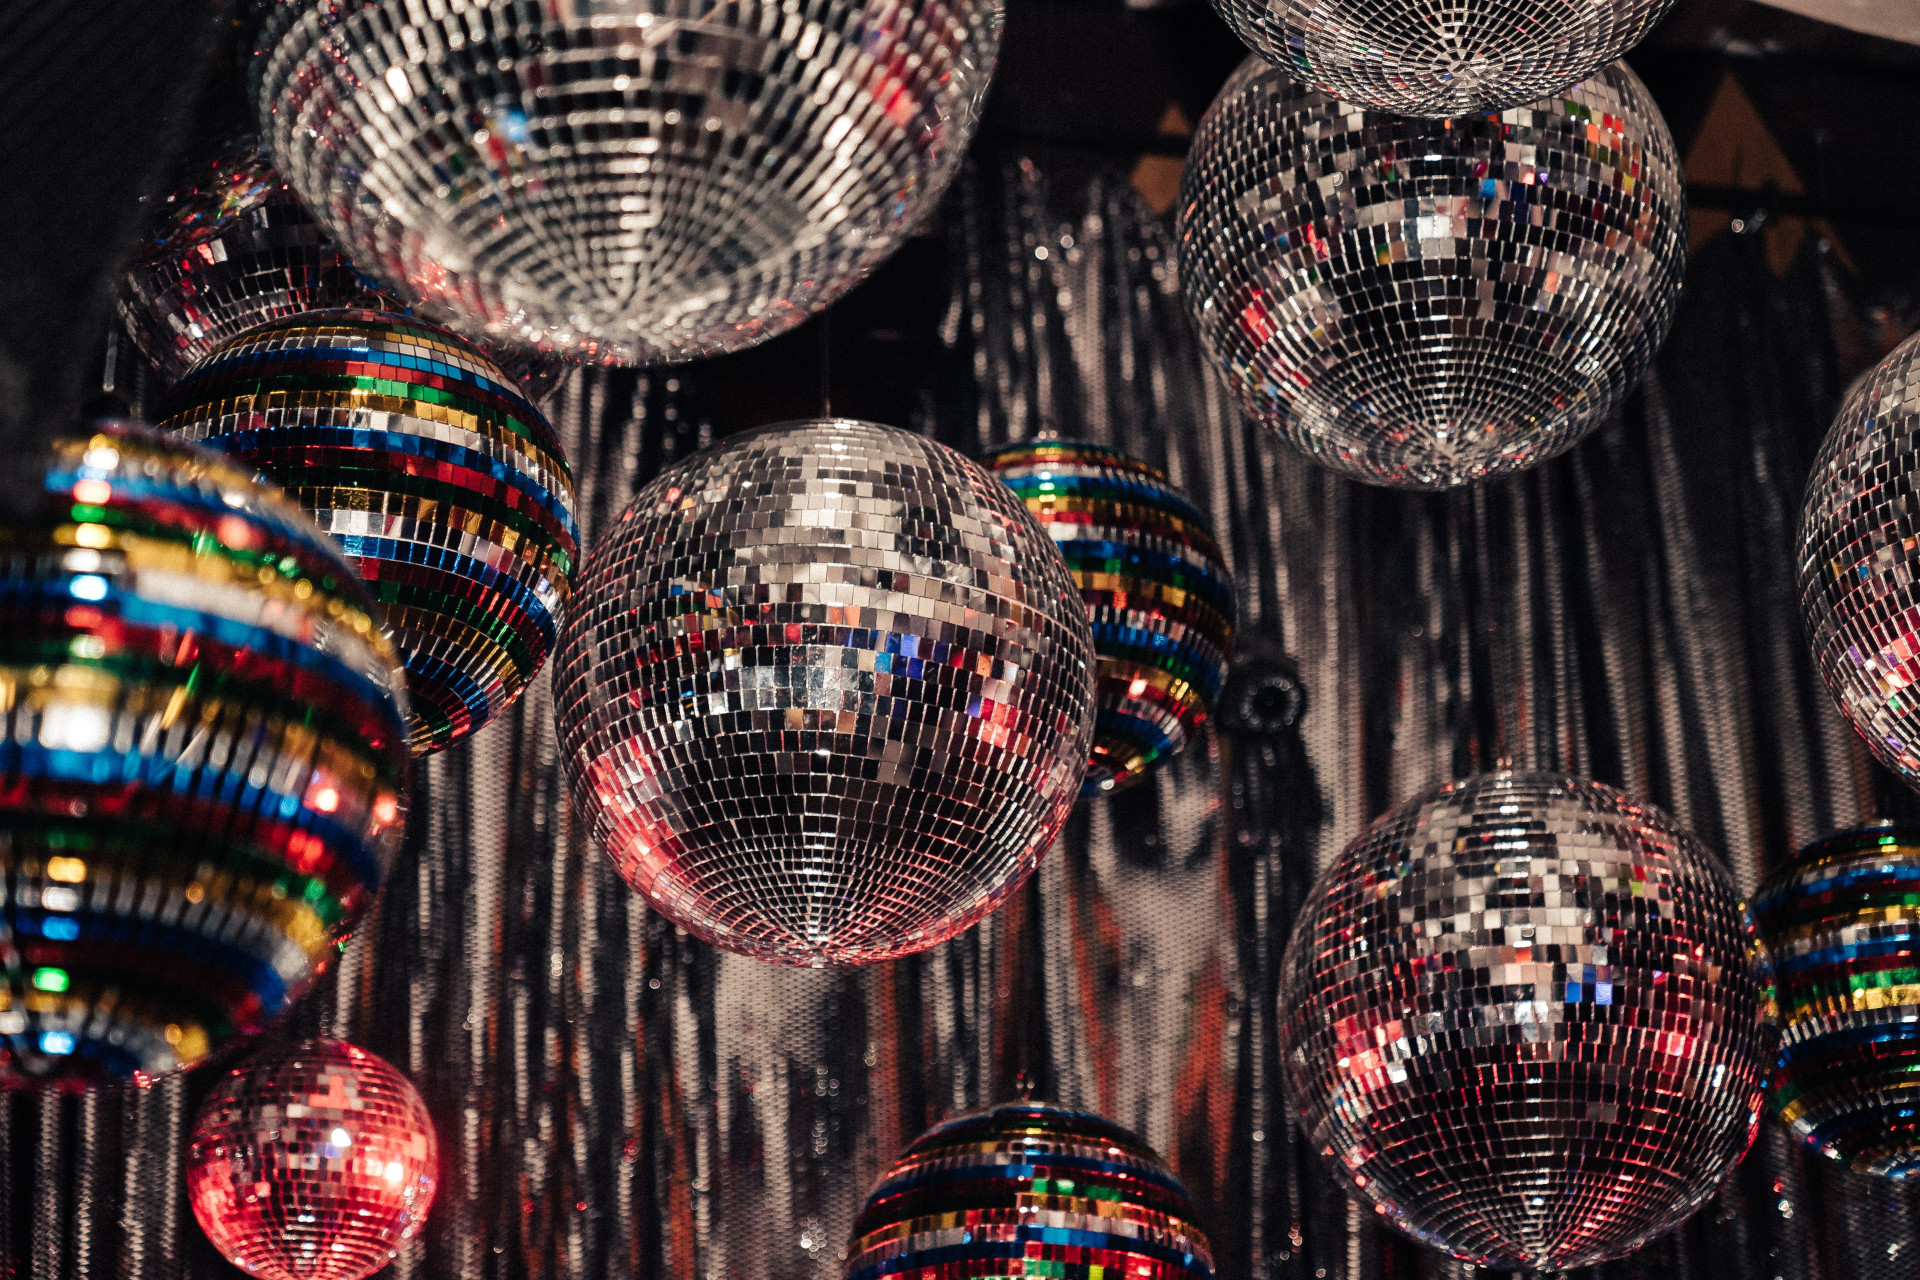 Disco balls hung together from ceiling